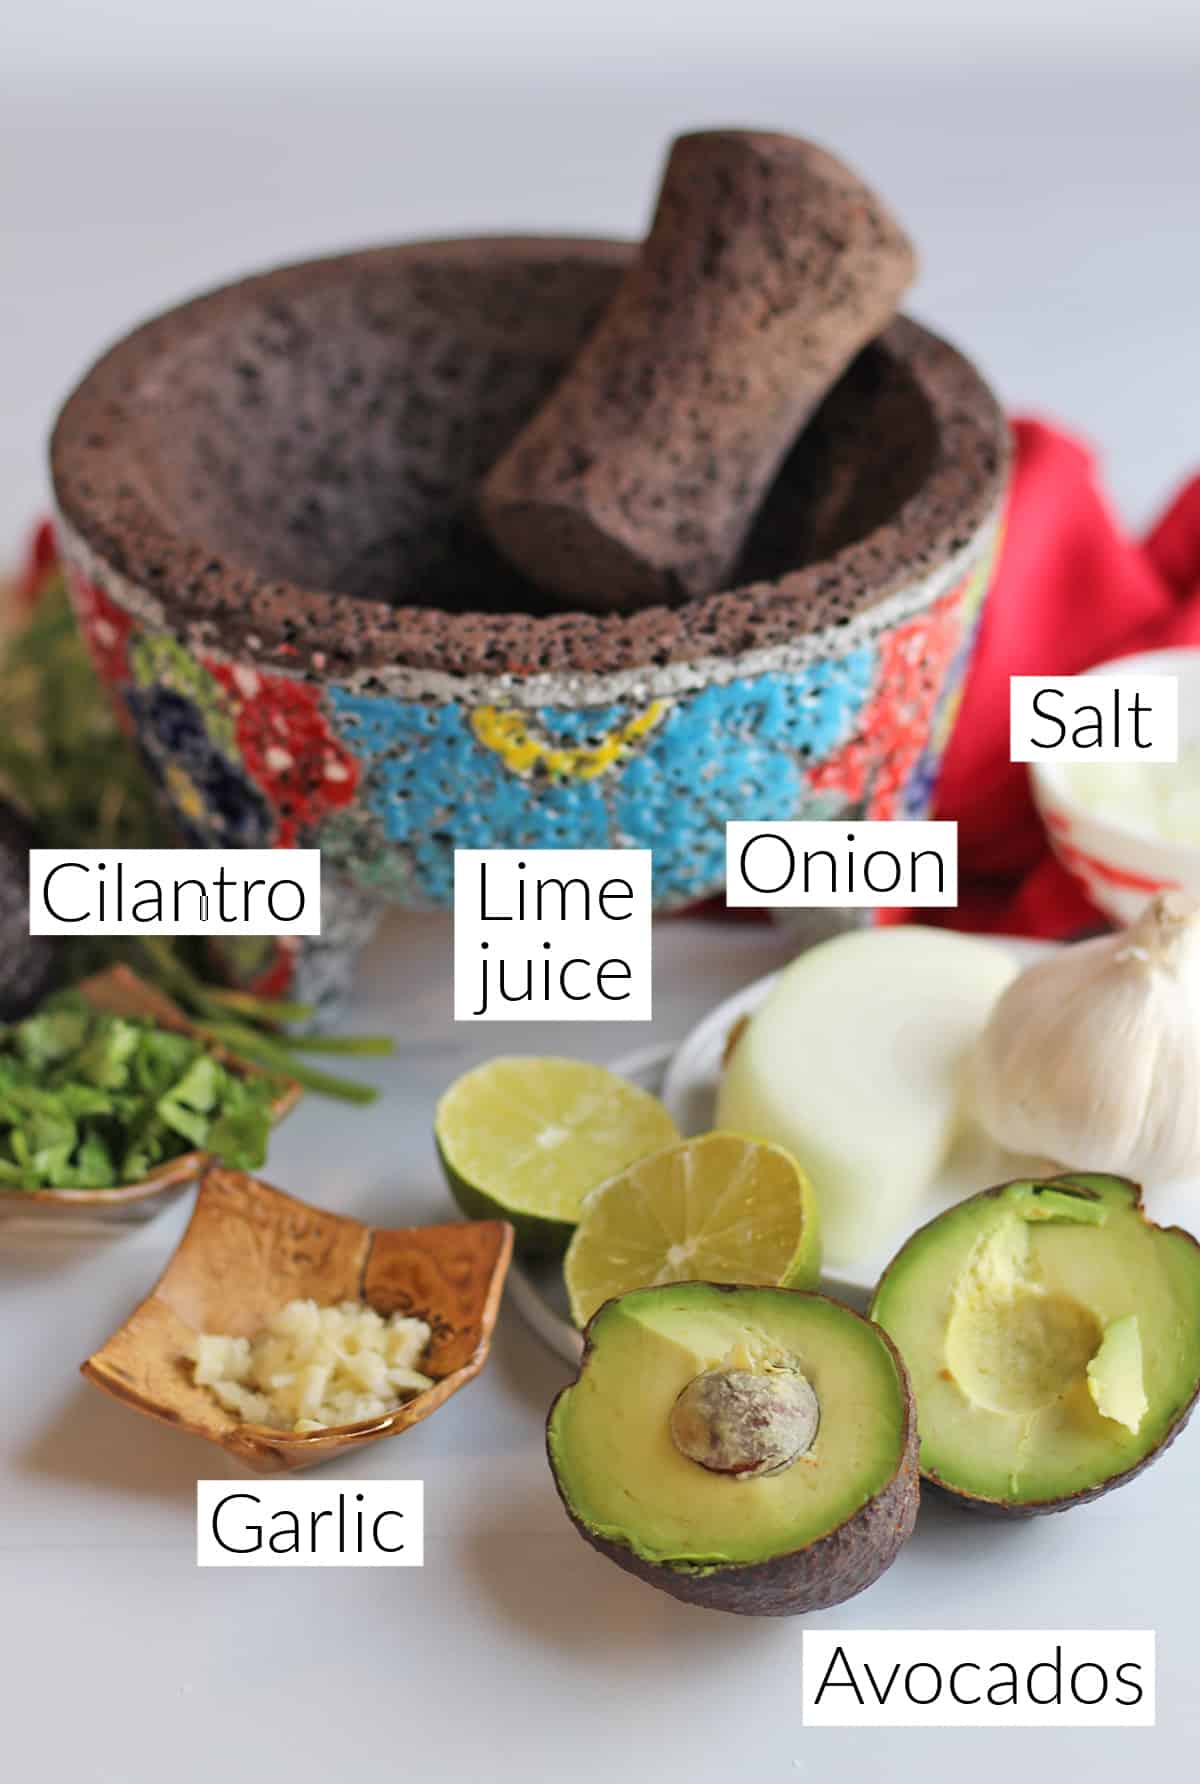 Labeled ingredients for vegan guacamole.